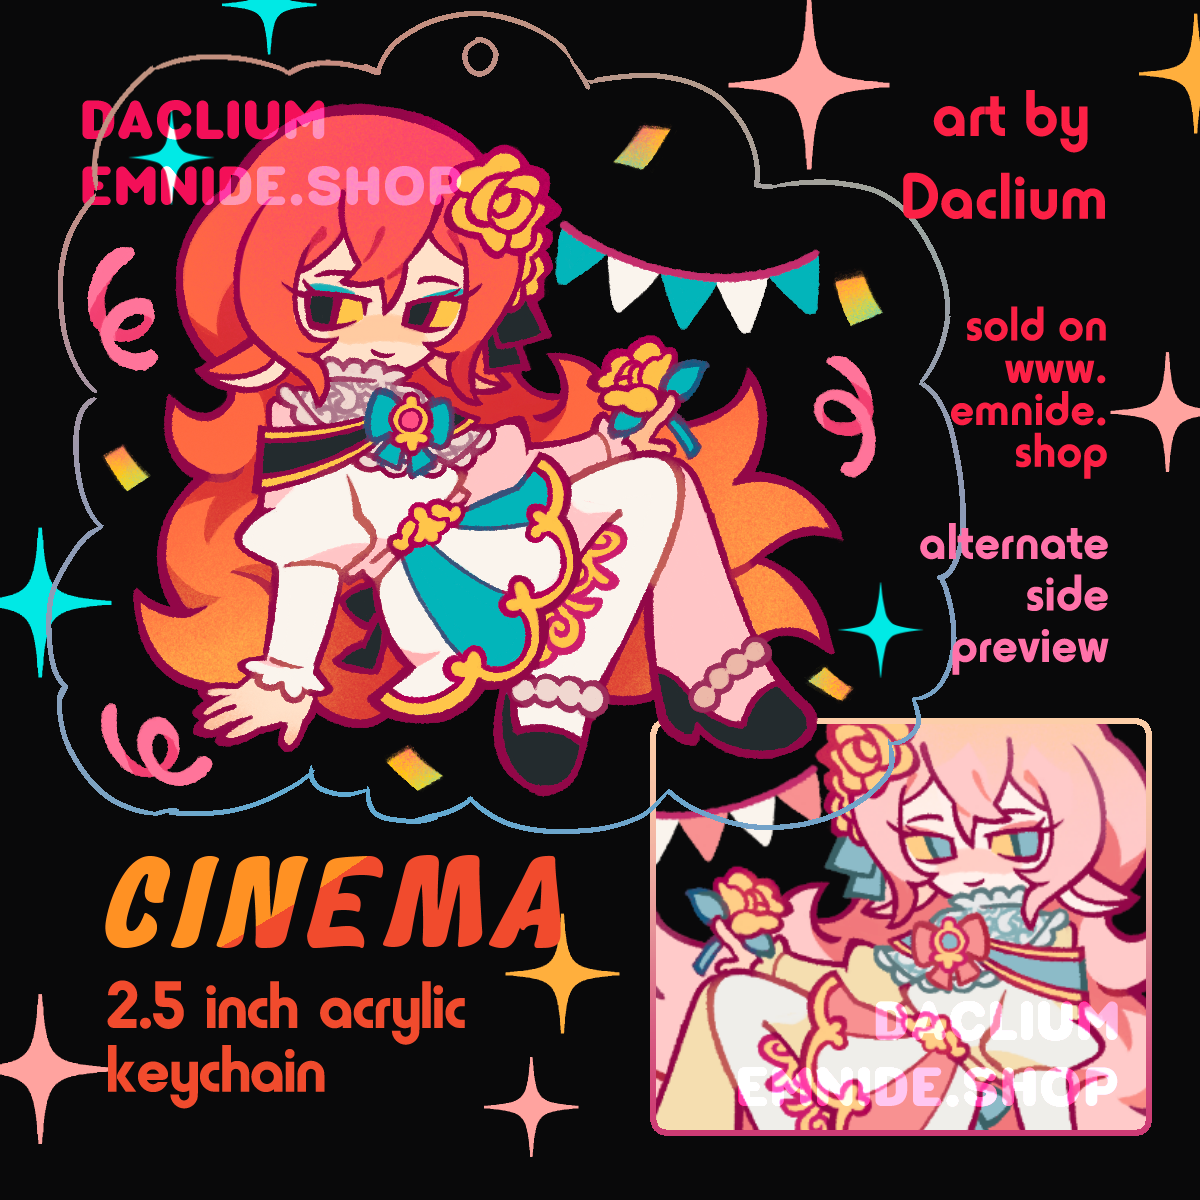 Clear acrylic charm mockup. The design features an original character with a circus theme outfit and long hair; one side features an orange palette, the other side features a soft pink palette.